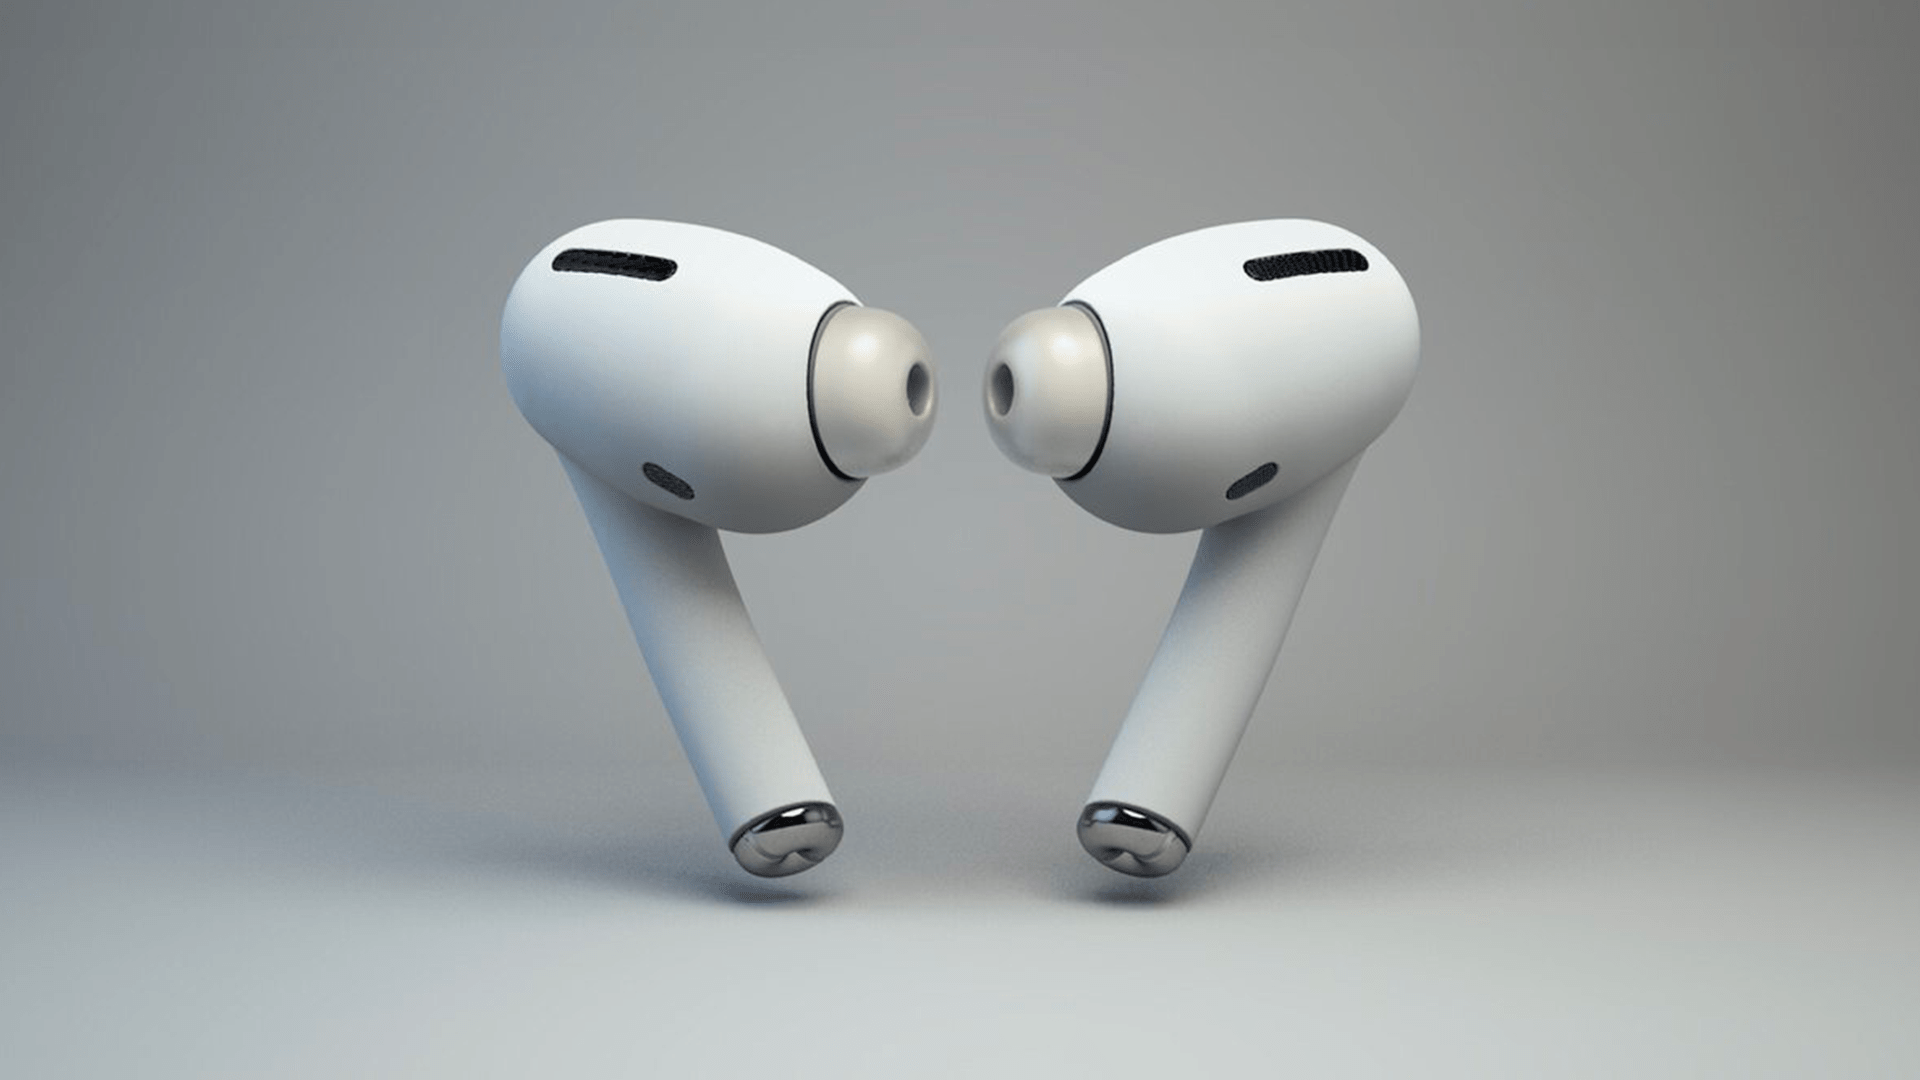 AirPods Concept